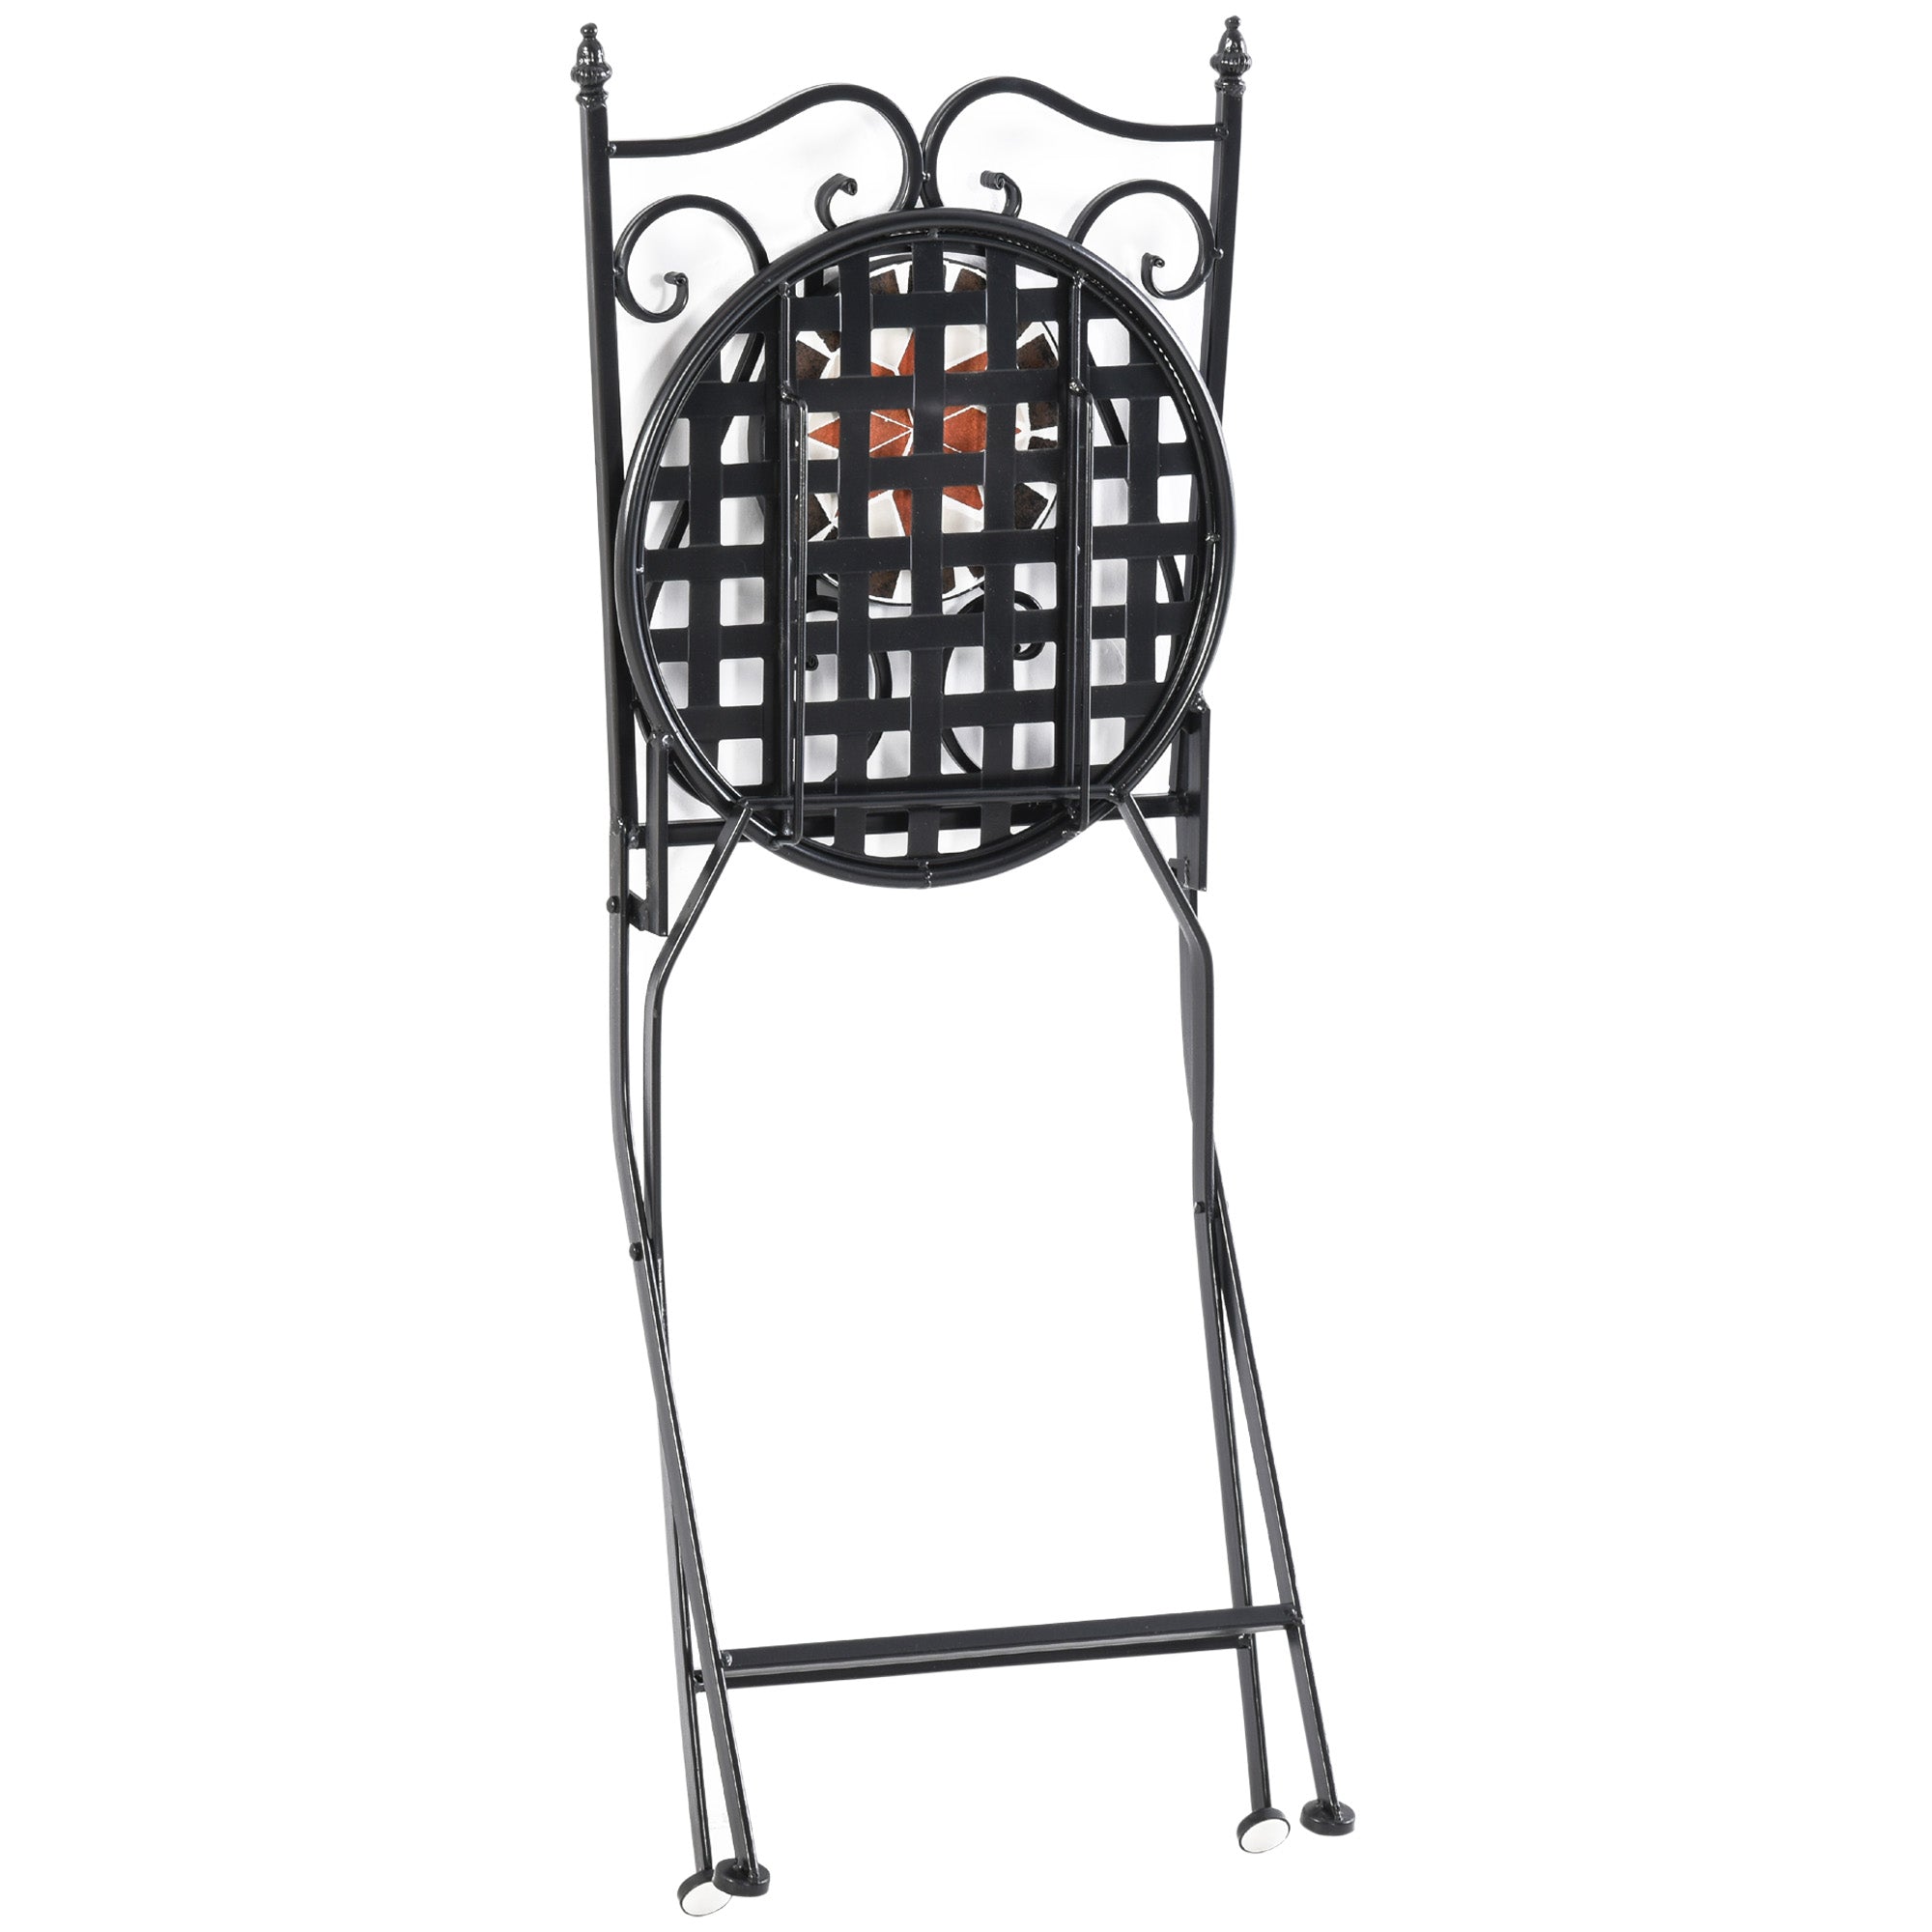 Nancy's Bettendorf Garden Set Group - 3-Piece Mosaic Table - 2 Folding Chairs - Metal - Multicolored